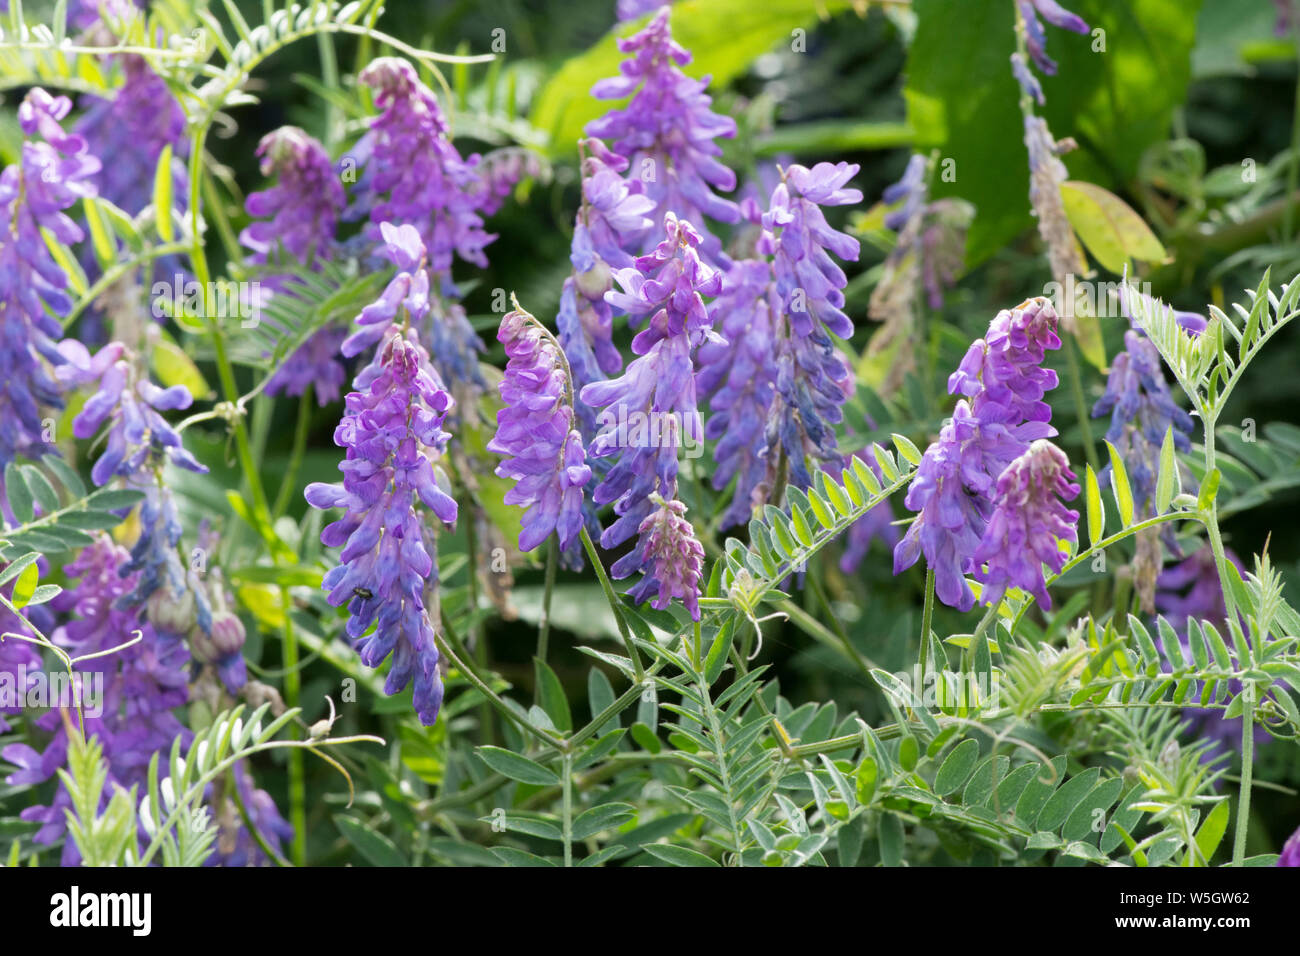 Tufted vetch, Cow vetch, Bird vetch, Vicia cracca, in hedgerow, Sussex, UK, July Stock Photo